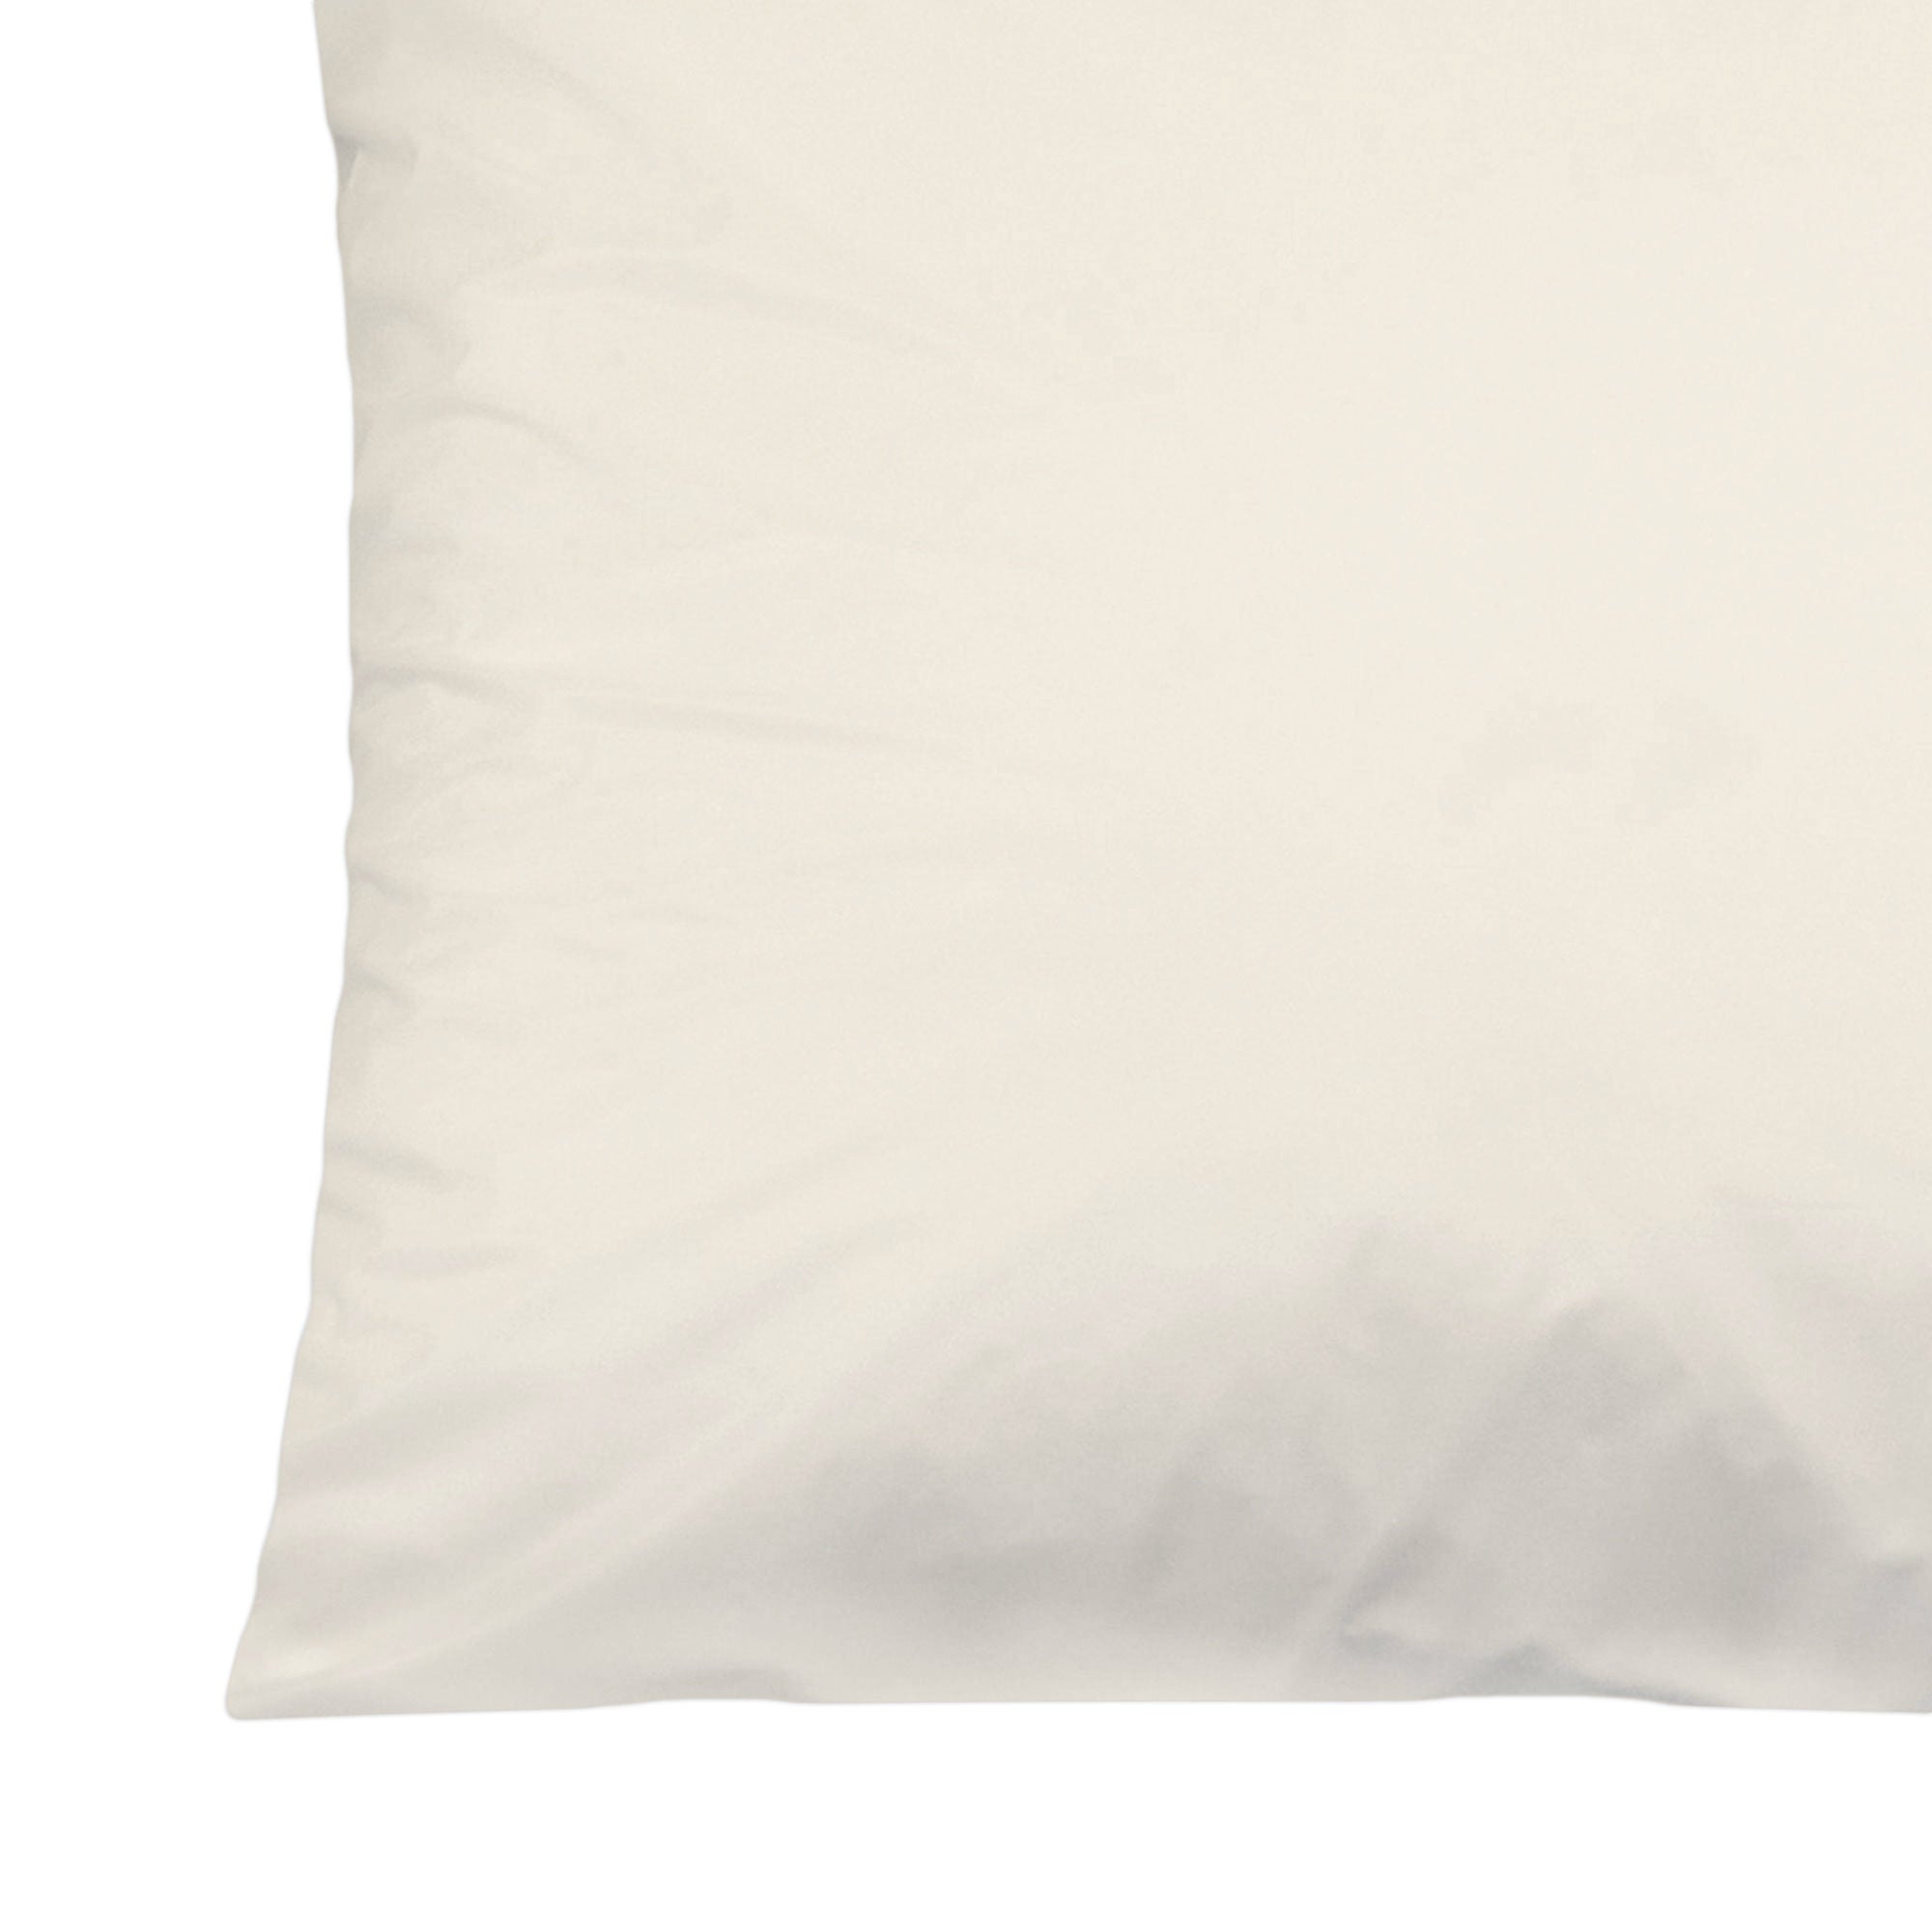 Organic Breathable Waterproof Pillow Protector-Standard